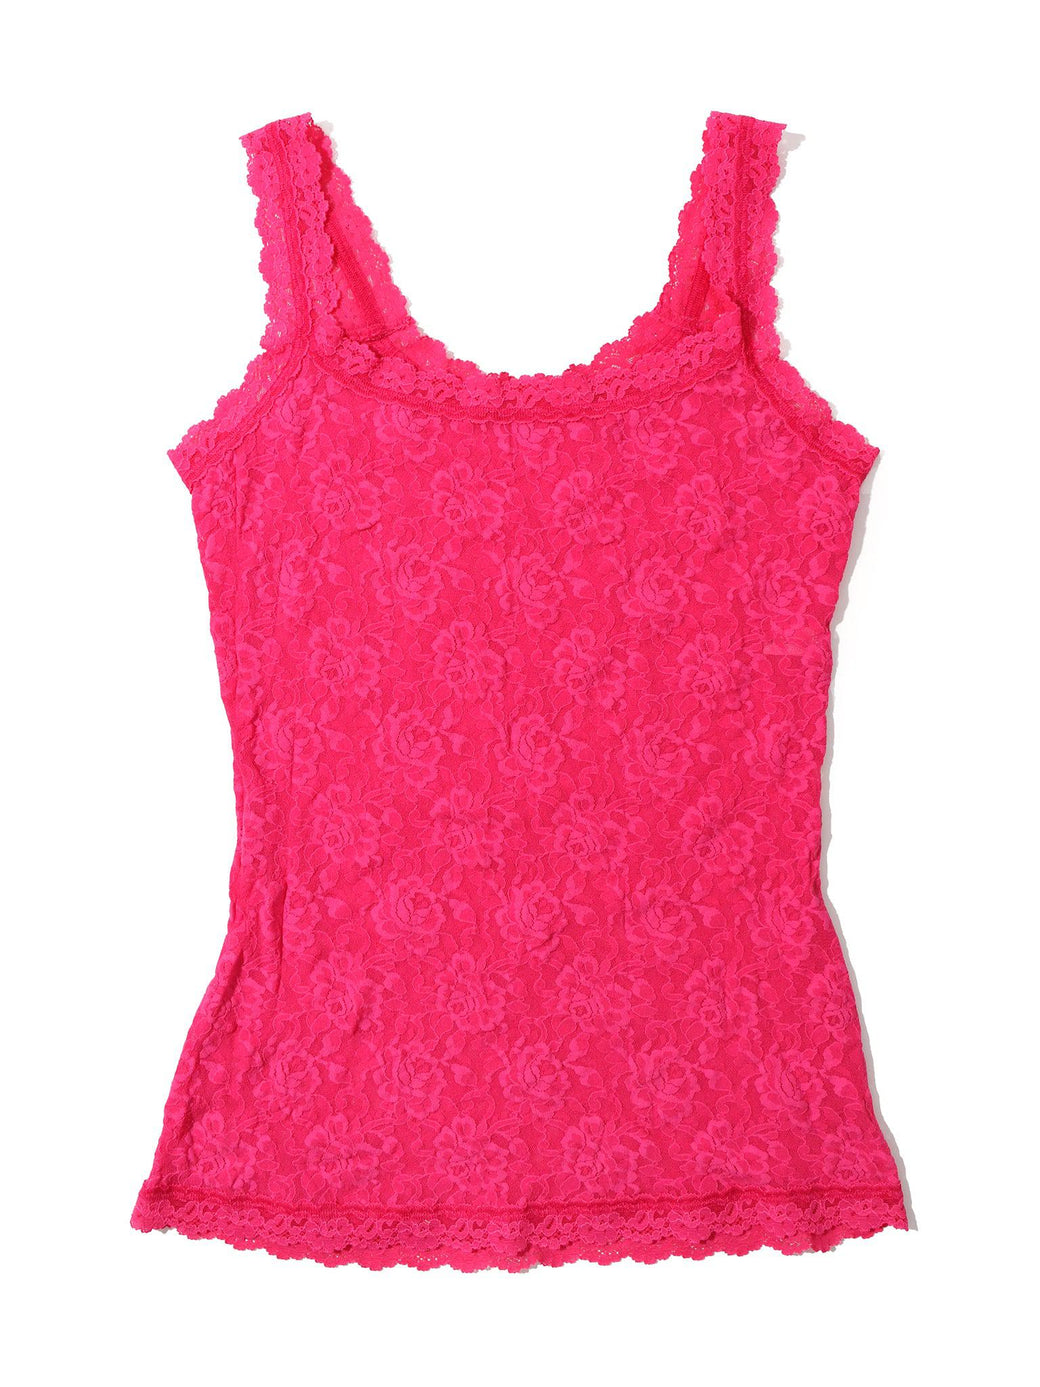 Signature Lace Classic Cami Morning Glory Pink